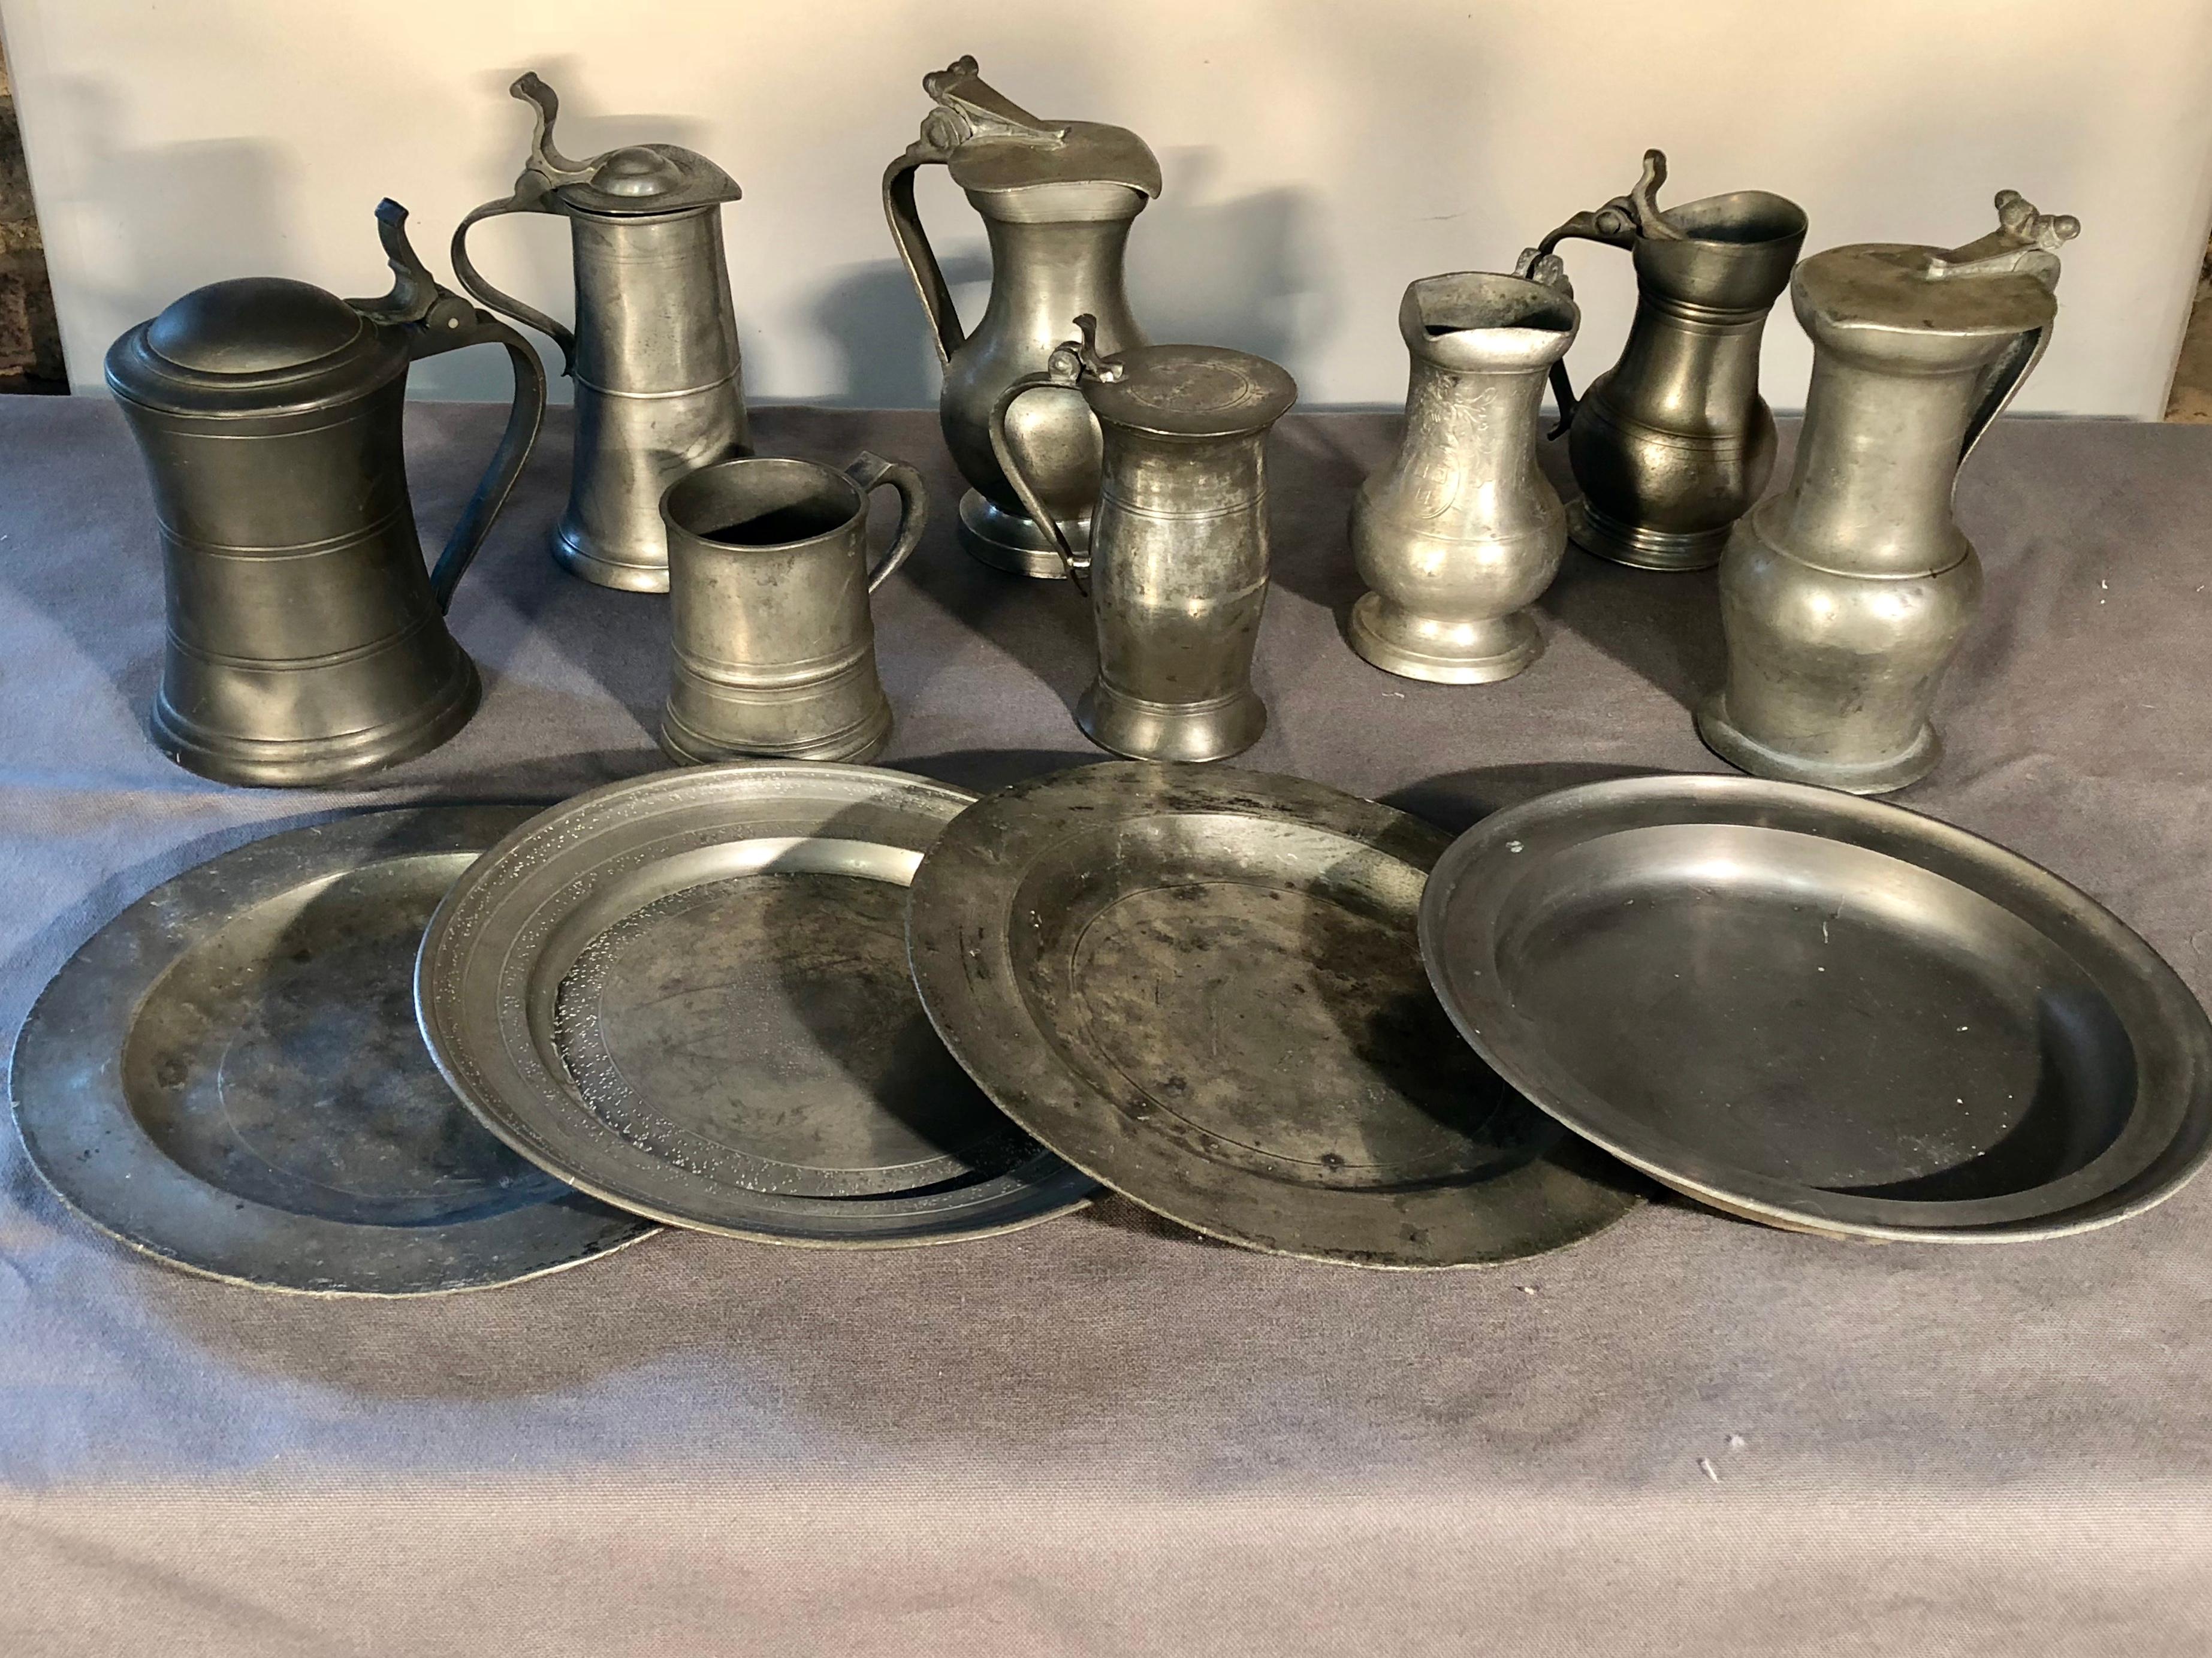 A collection of 12 pieces of American and European antique pewter tankards and plates, some with hallmarks and written descriptions taped inside. A quick way to fill that cupboard! Tallest is 7”. Plates are 9” diameter.